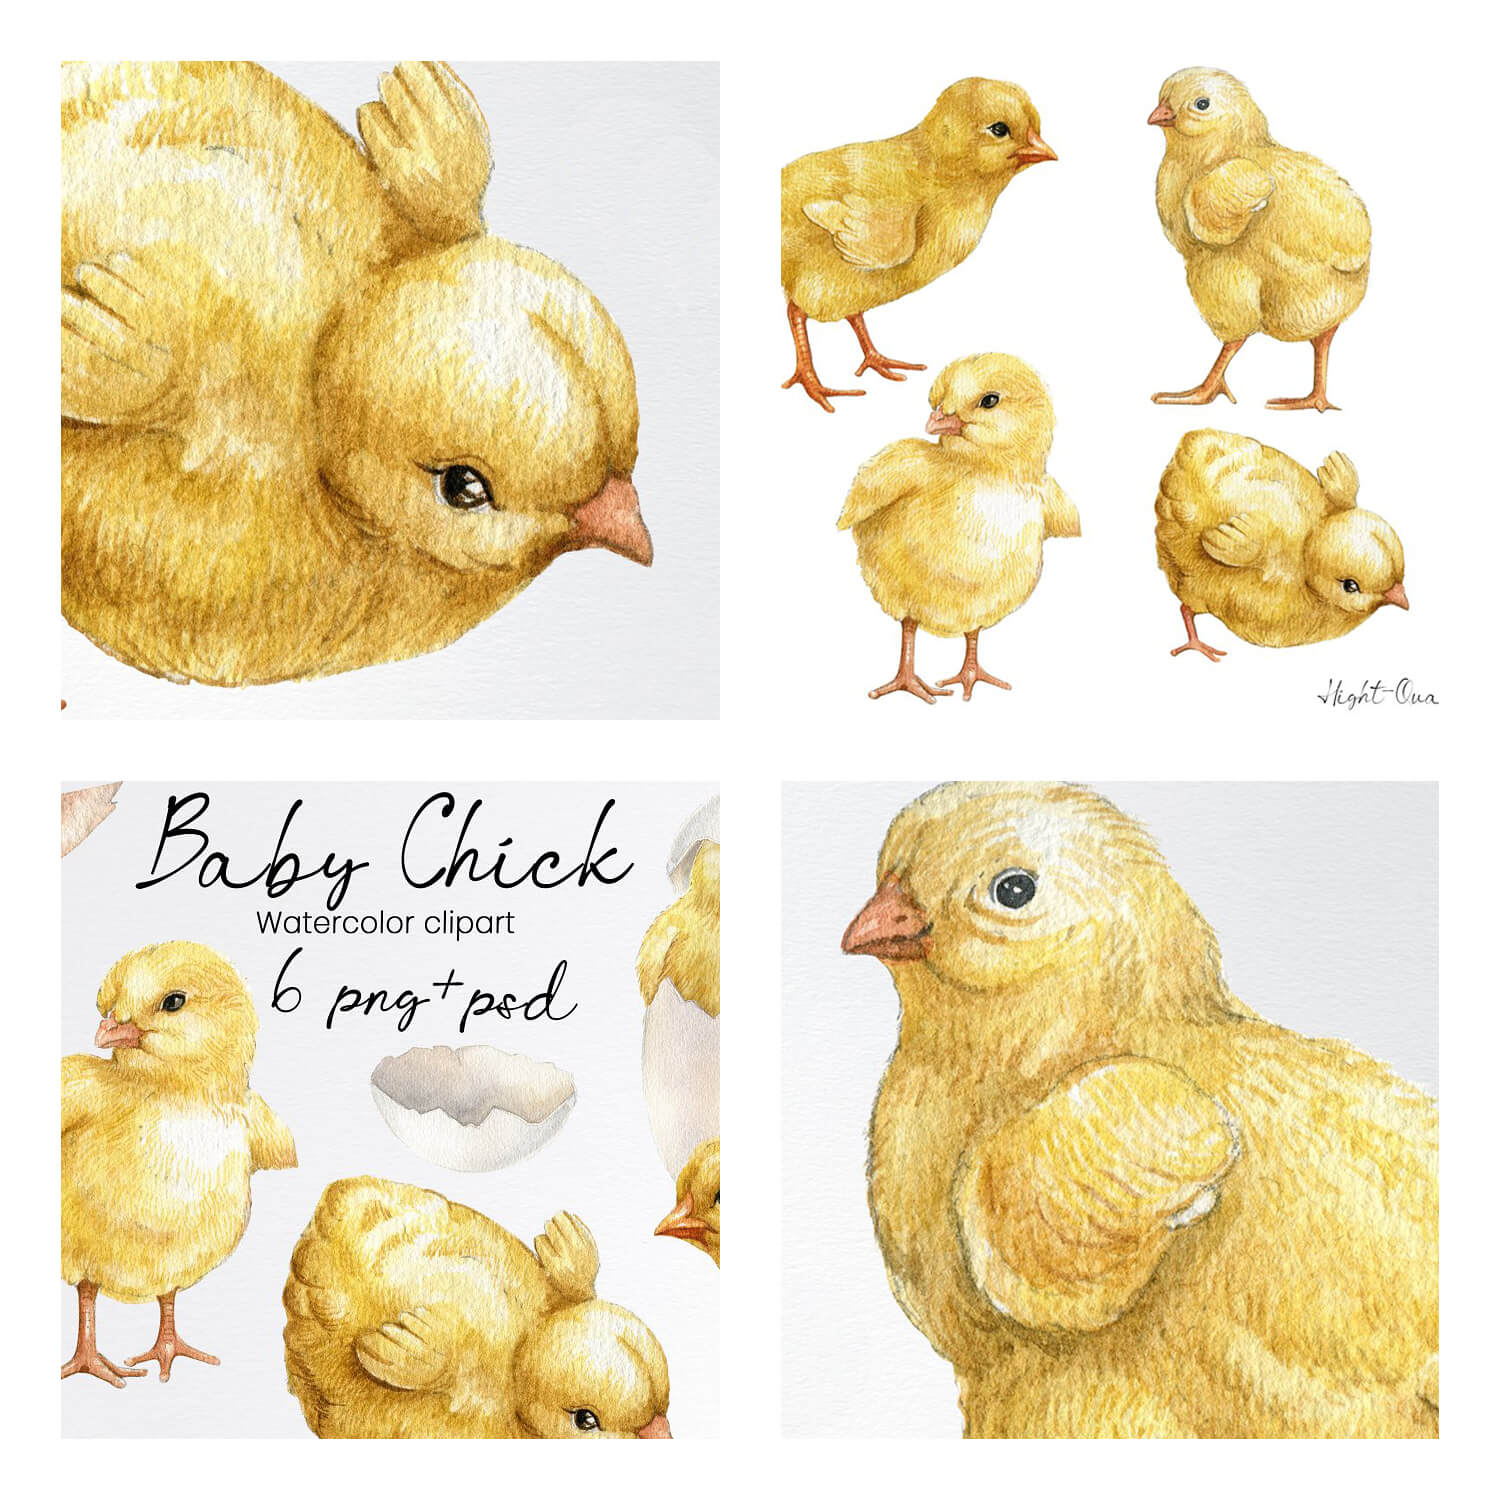 Four pictures with chickens and an inscription on one of them: Baby Chick Watercolor clipart, 6 png+psd.